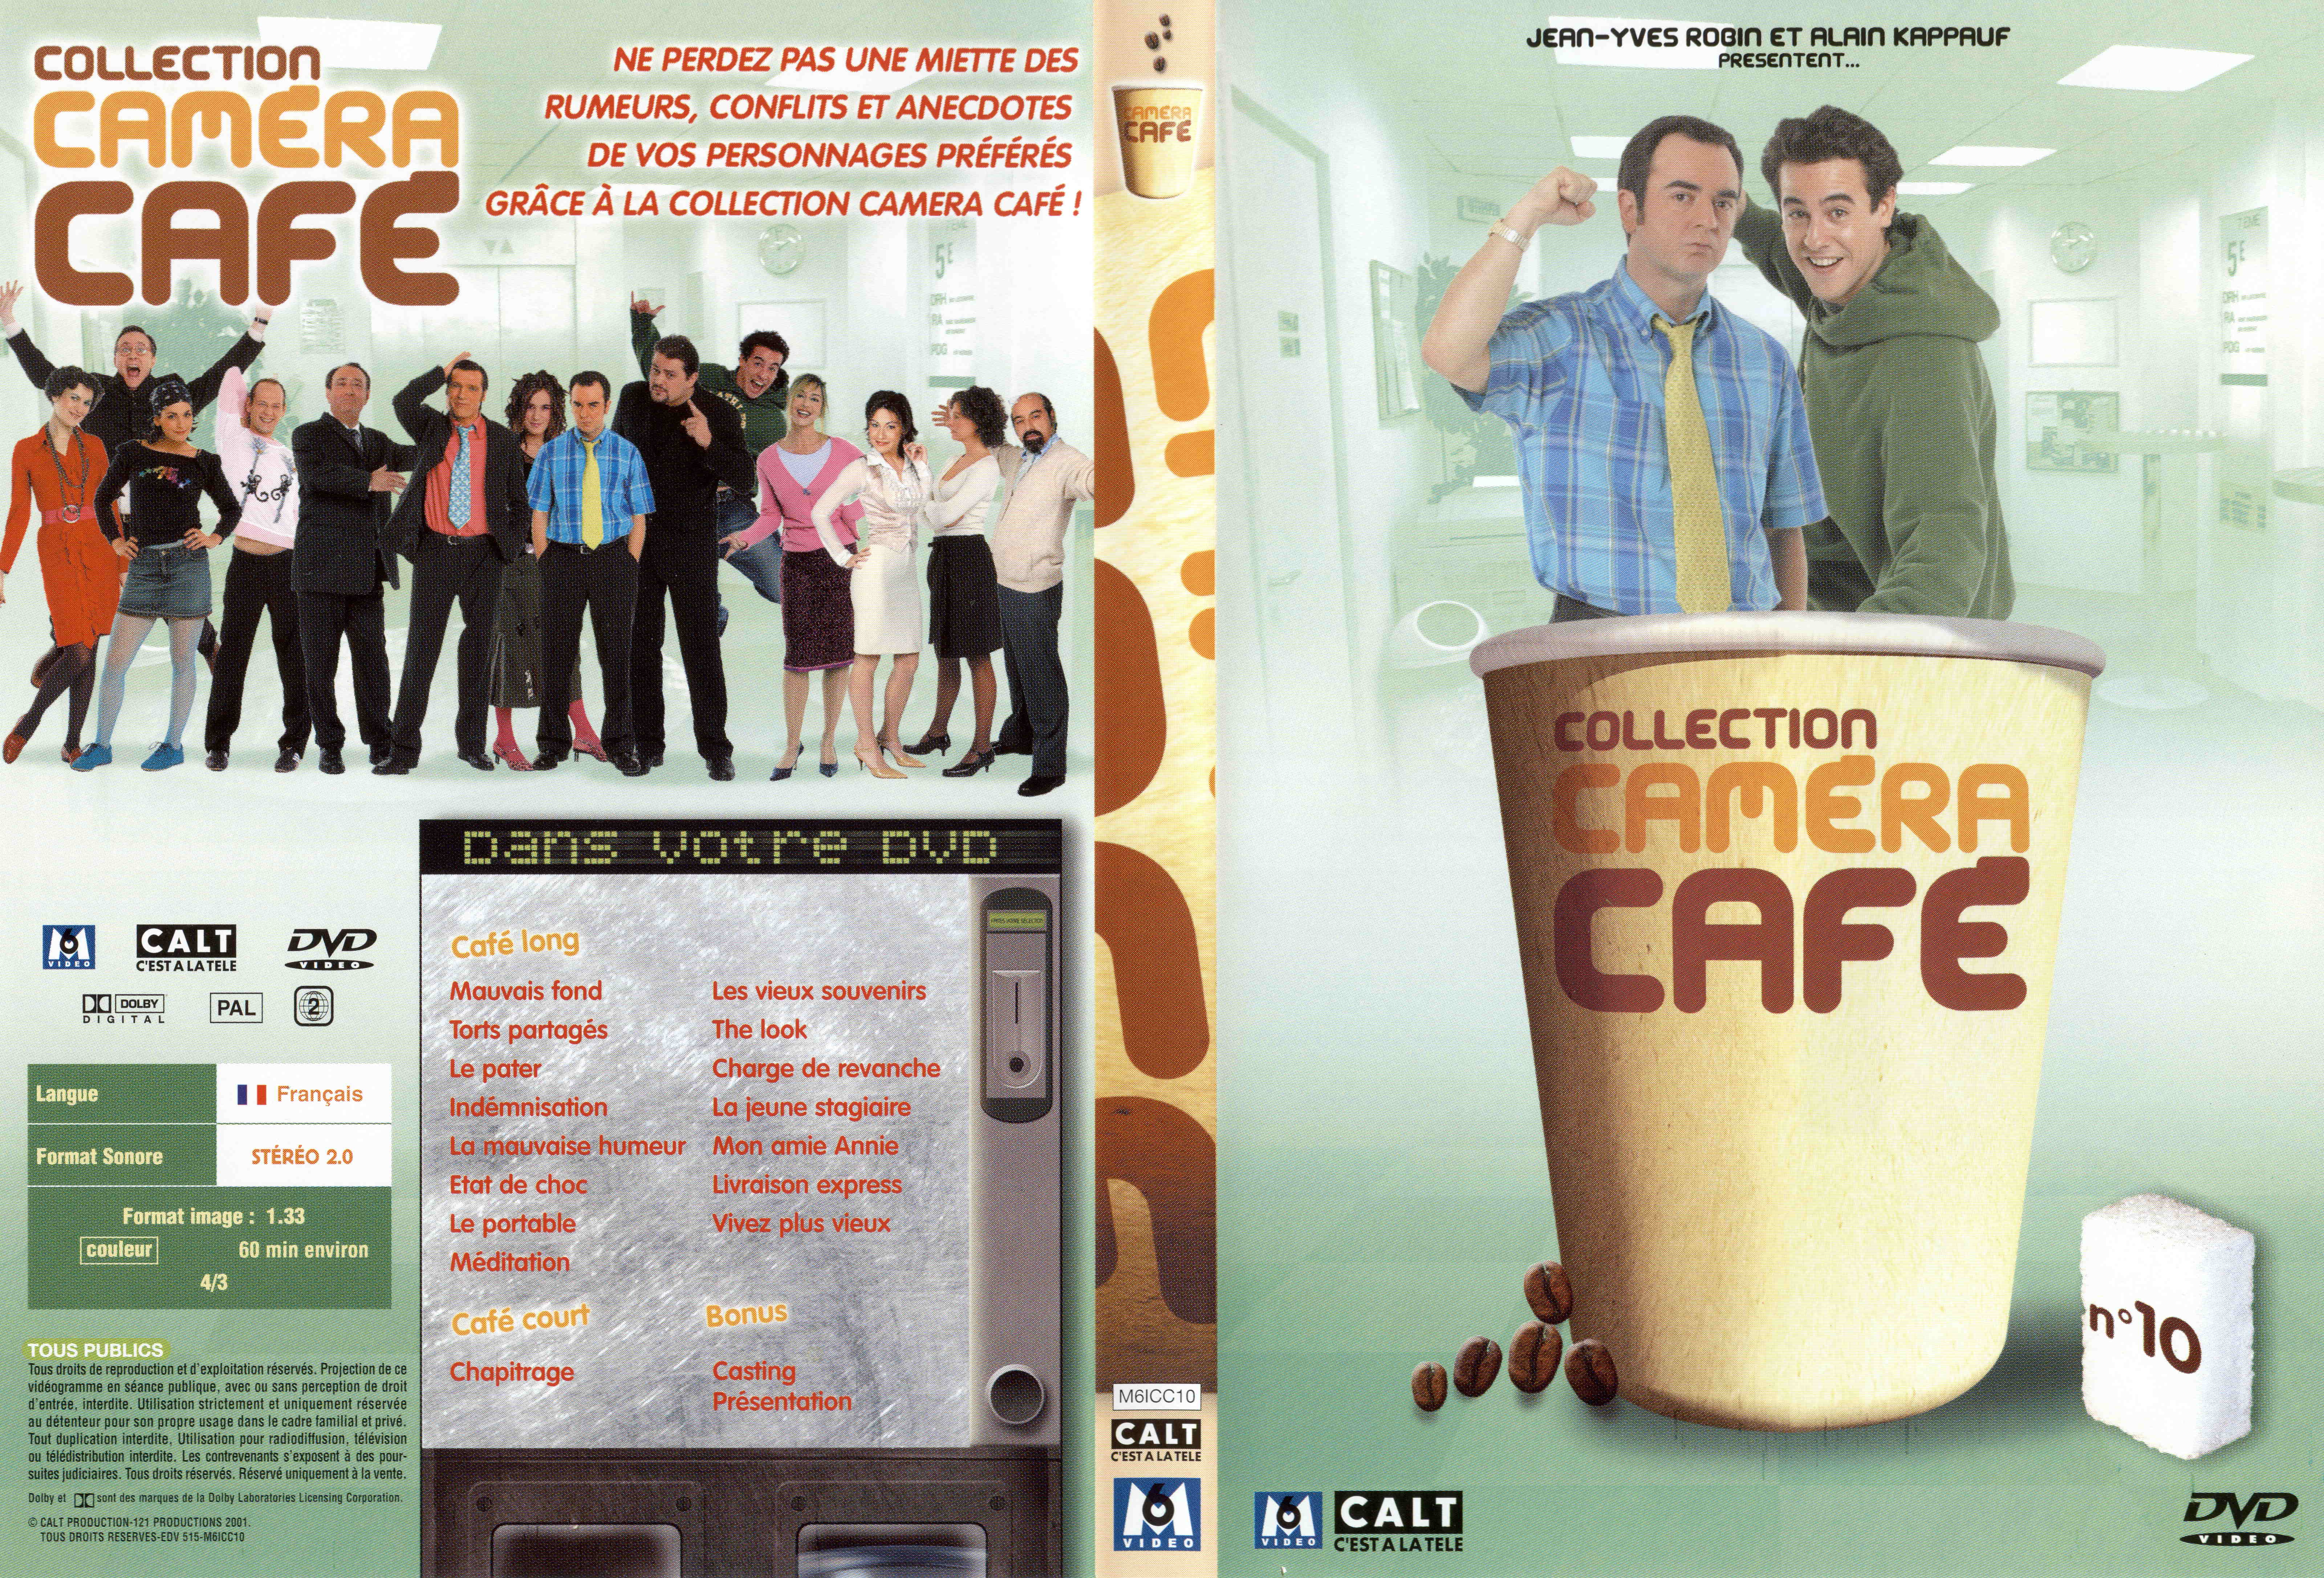 Jaquette DVD Collection Camera Cafe vol 10